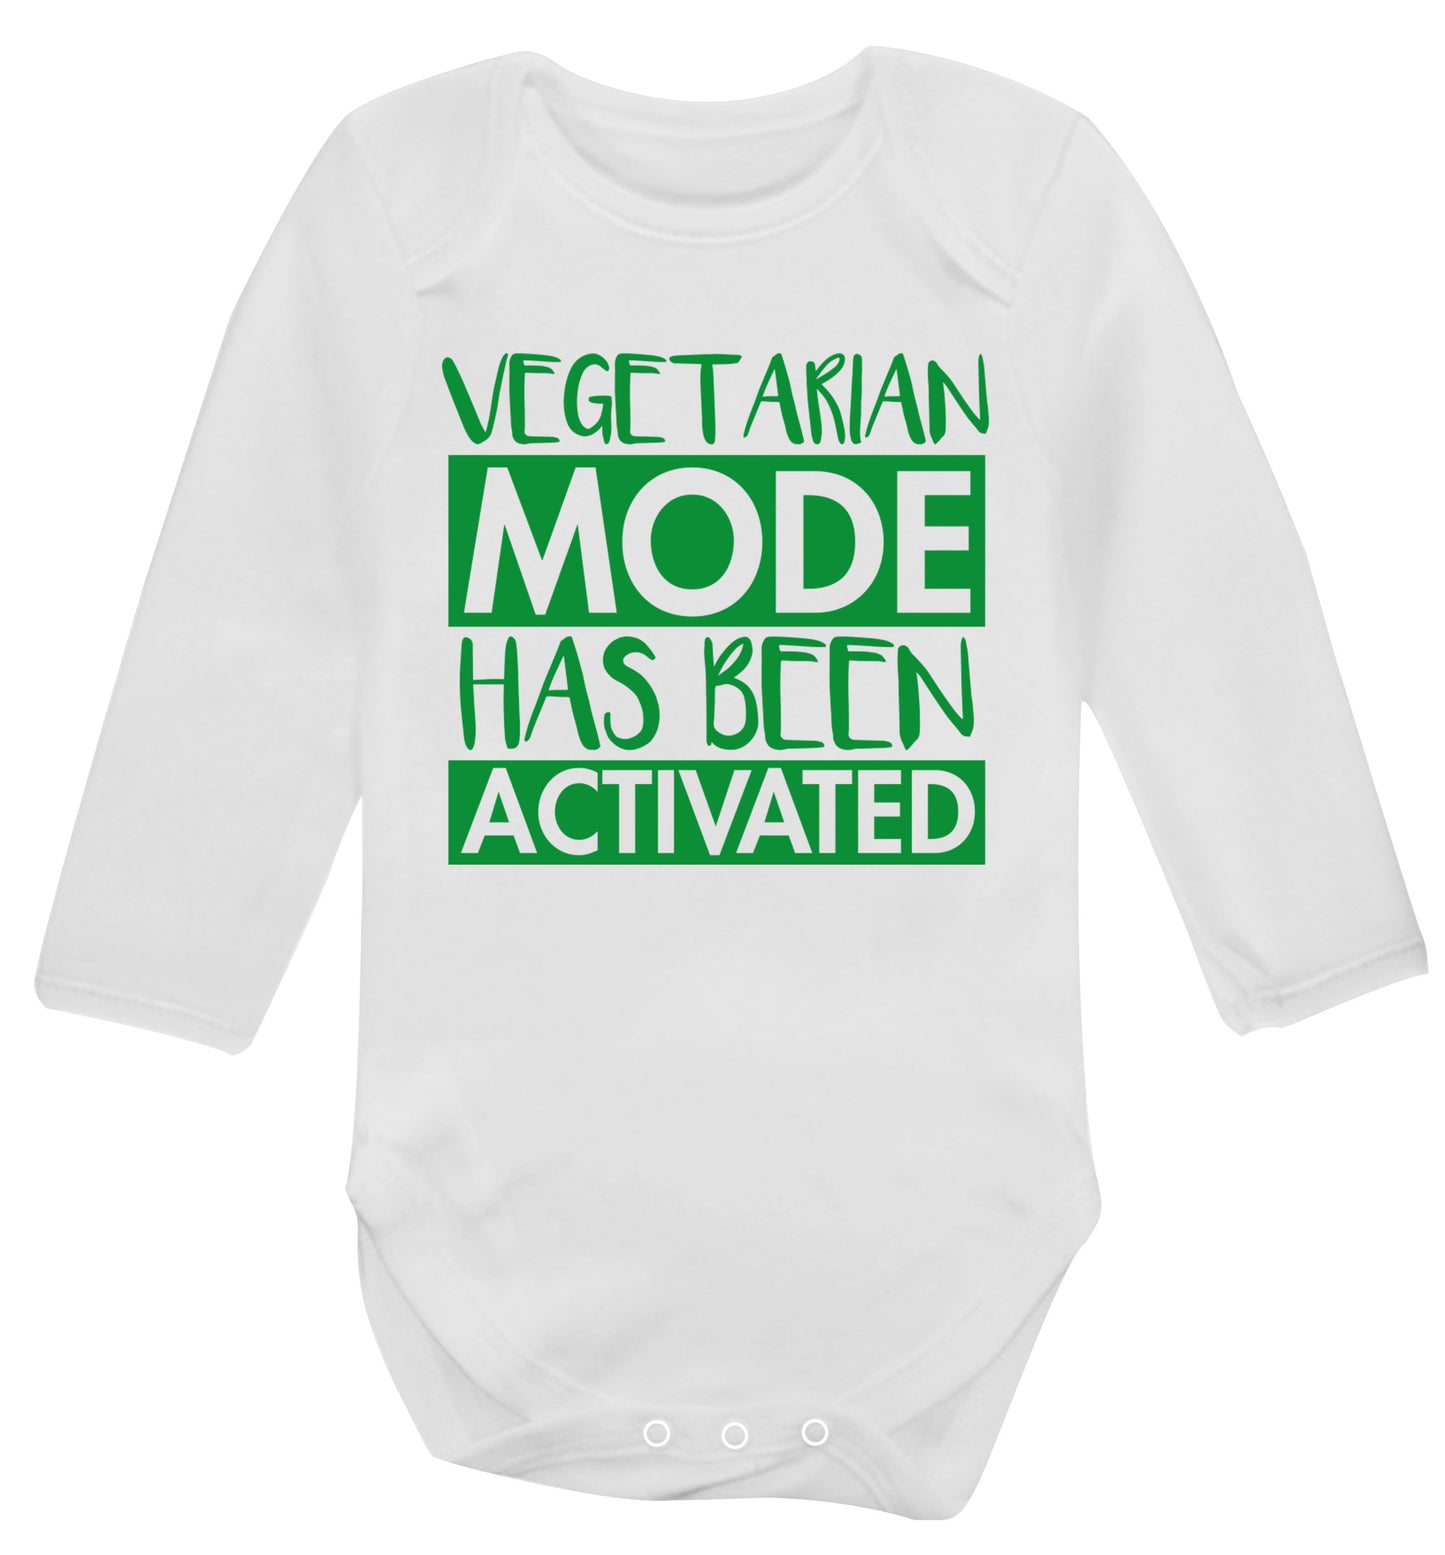 Vegetarian mode activated Baby Vest long sleeved white 6-12 months